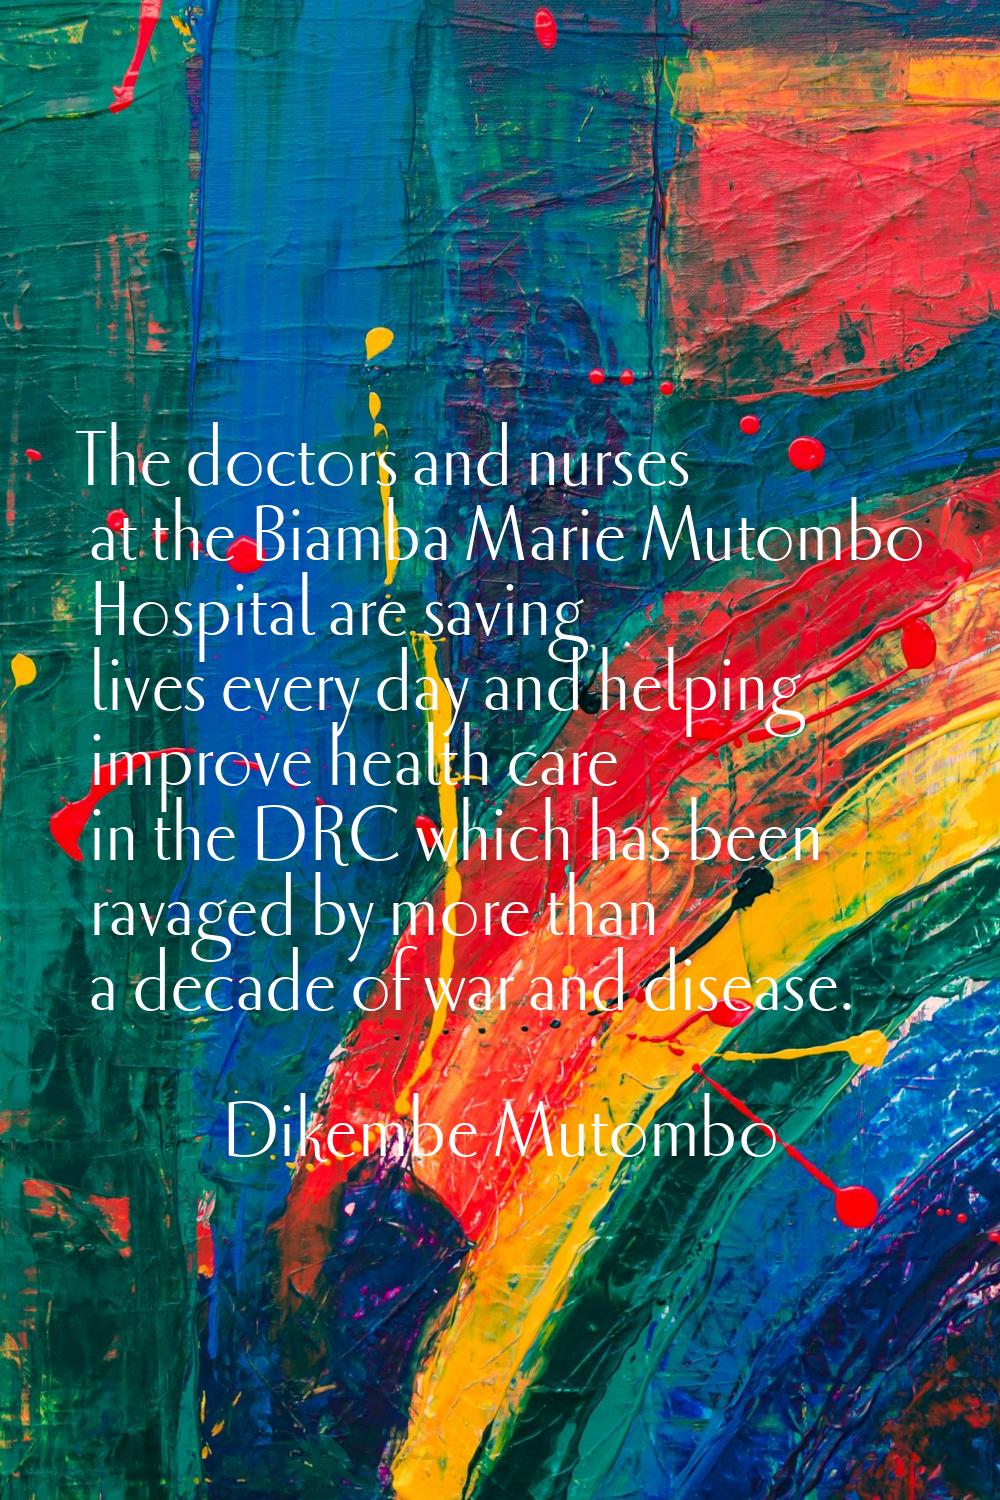 The doctors and nurses at the Biamba Marie Mutombo Hospital are saving lives every day and helping 